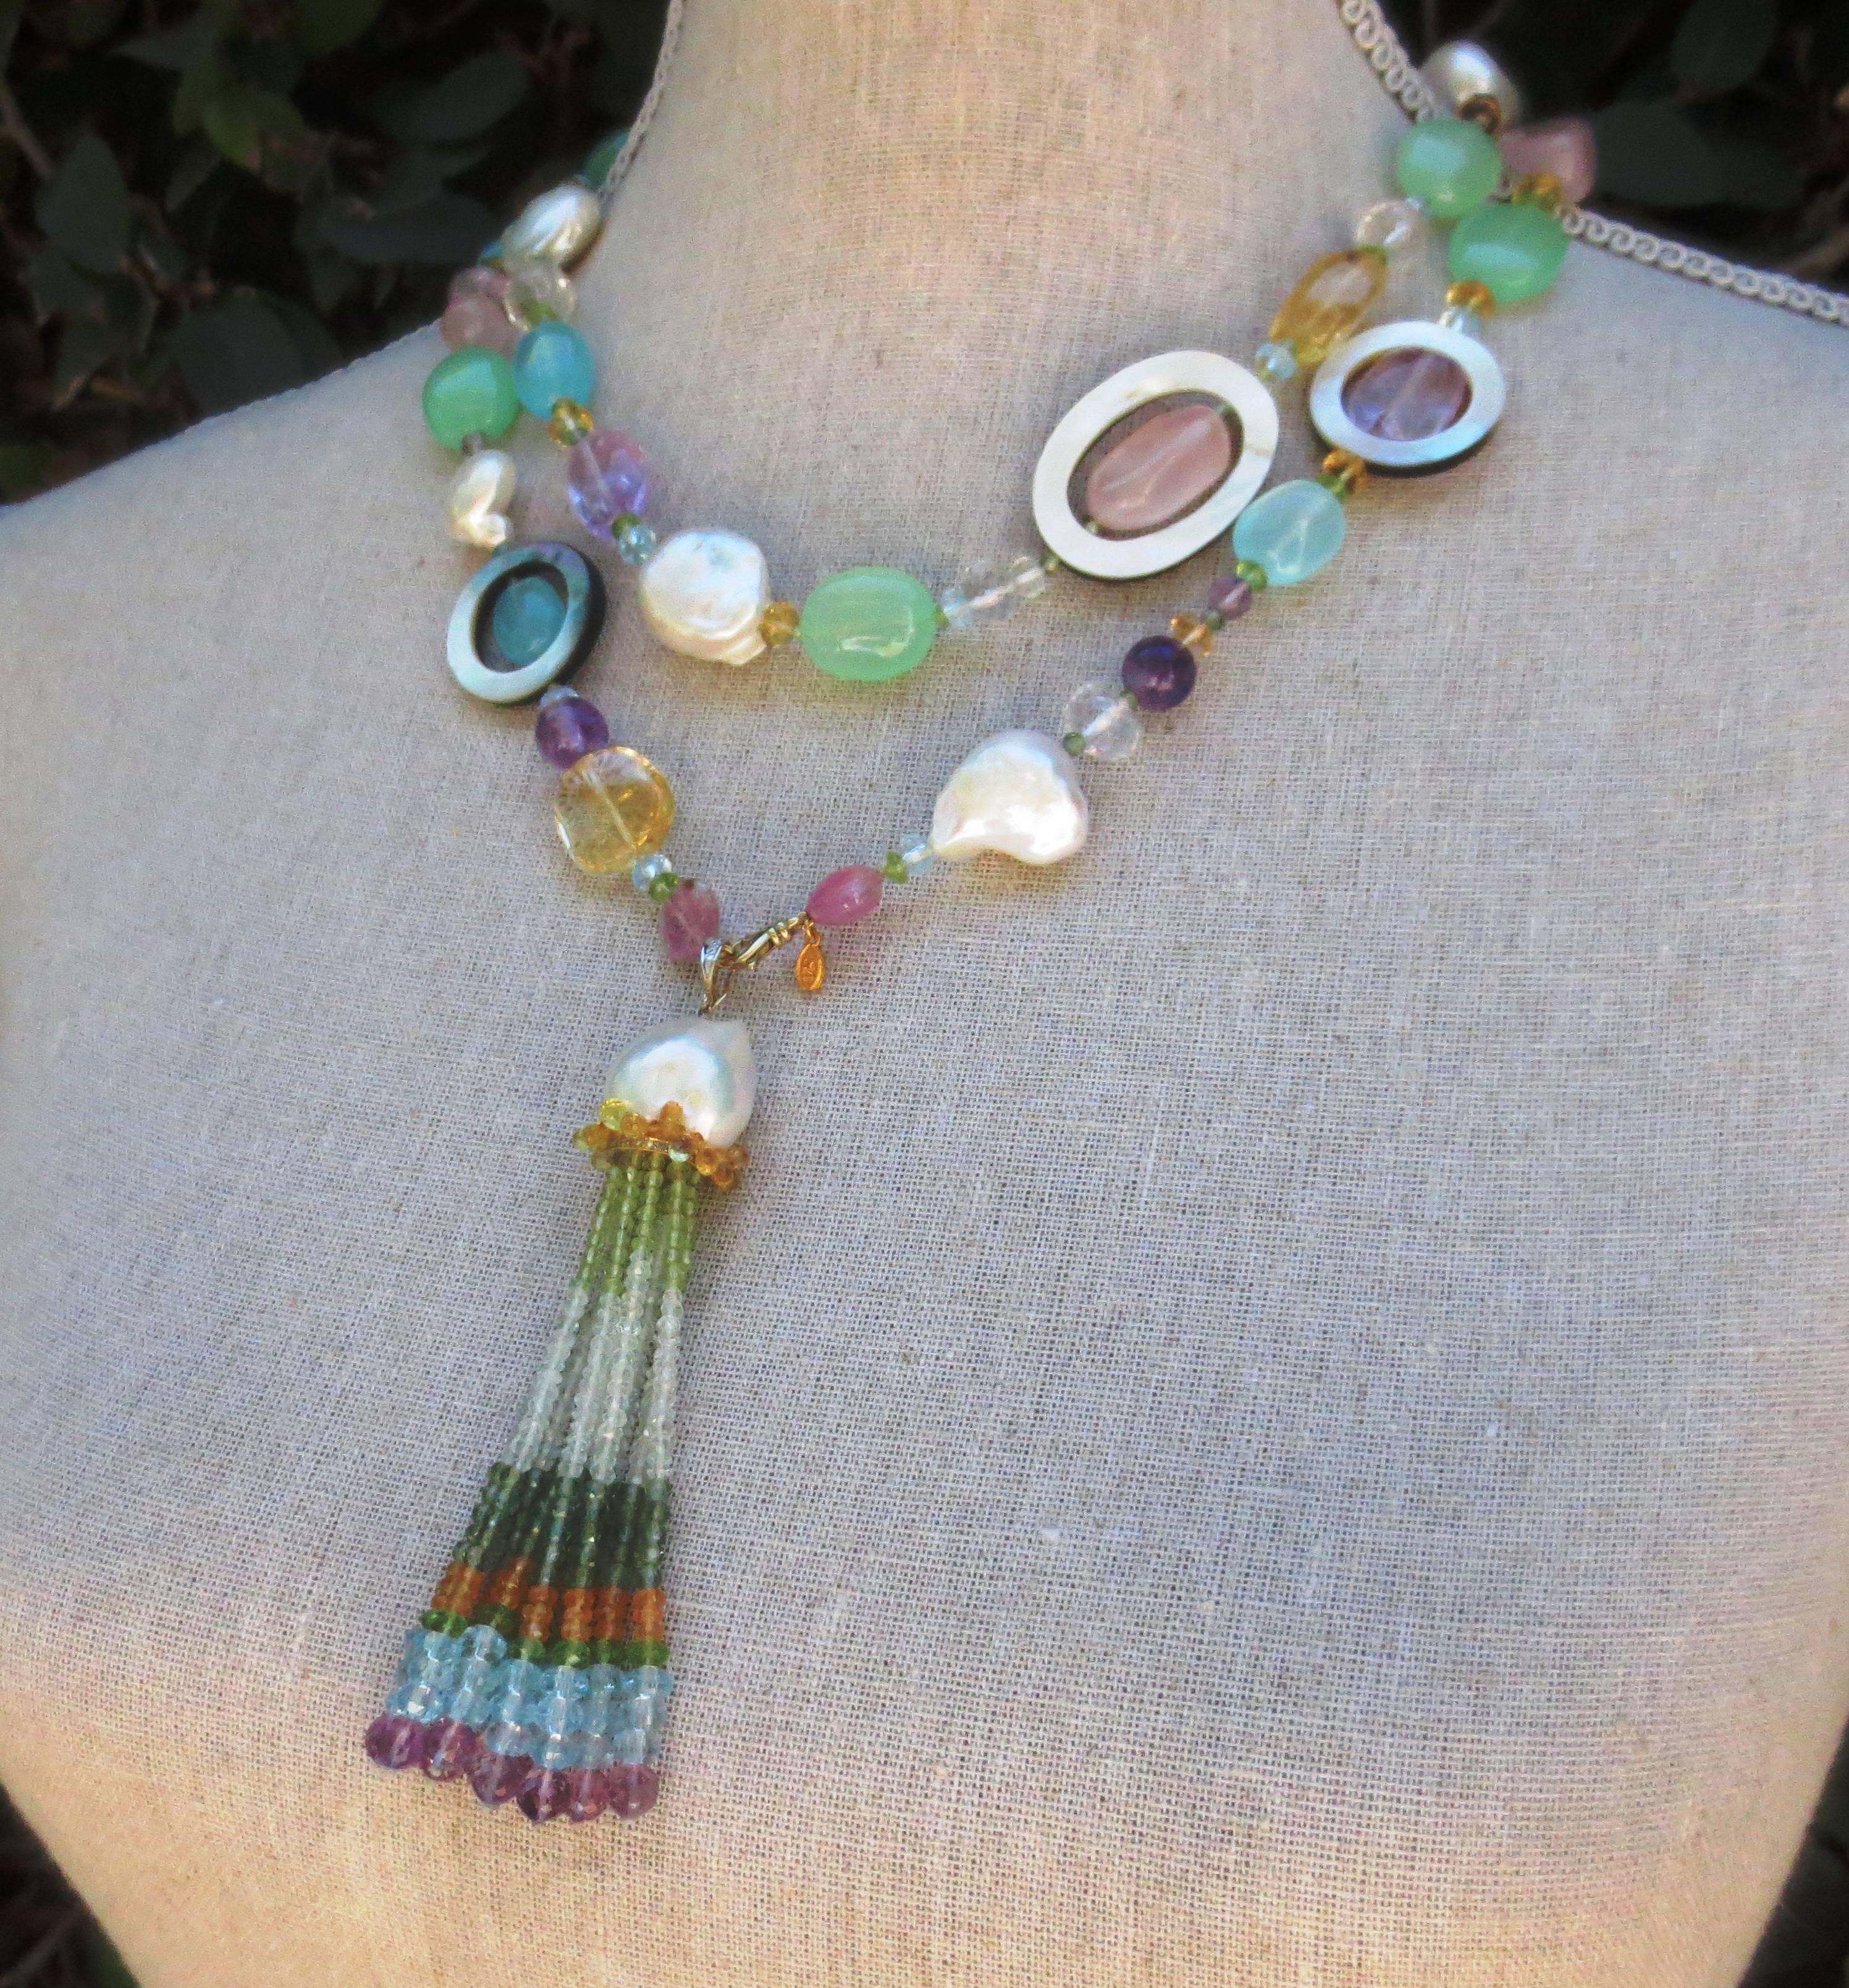 Multi color semi-precious stones: Citrine, Baroque Pearl, Pink quartz, Blue and Green Apatite, Amethyst, Peridot, Florite, and Mother-of-Pearl are combined to create a gorgeous shimmering piece.  

This stunning necklace can be worn long, or